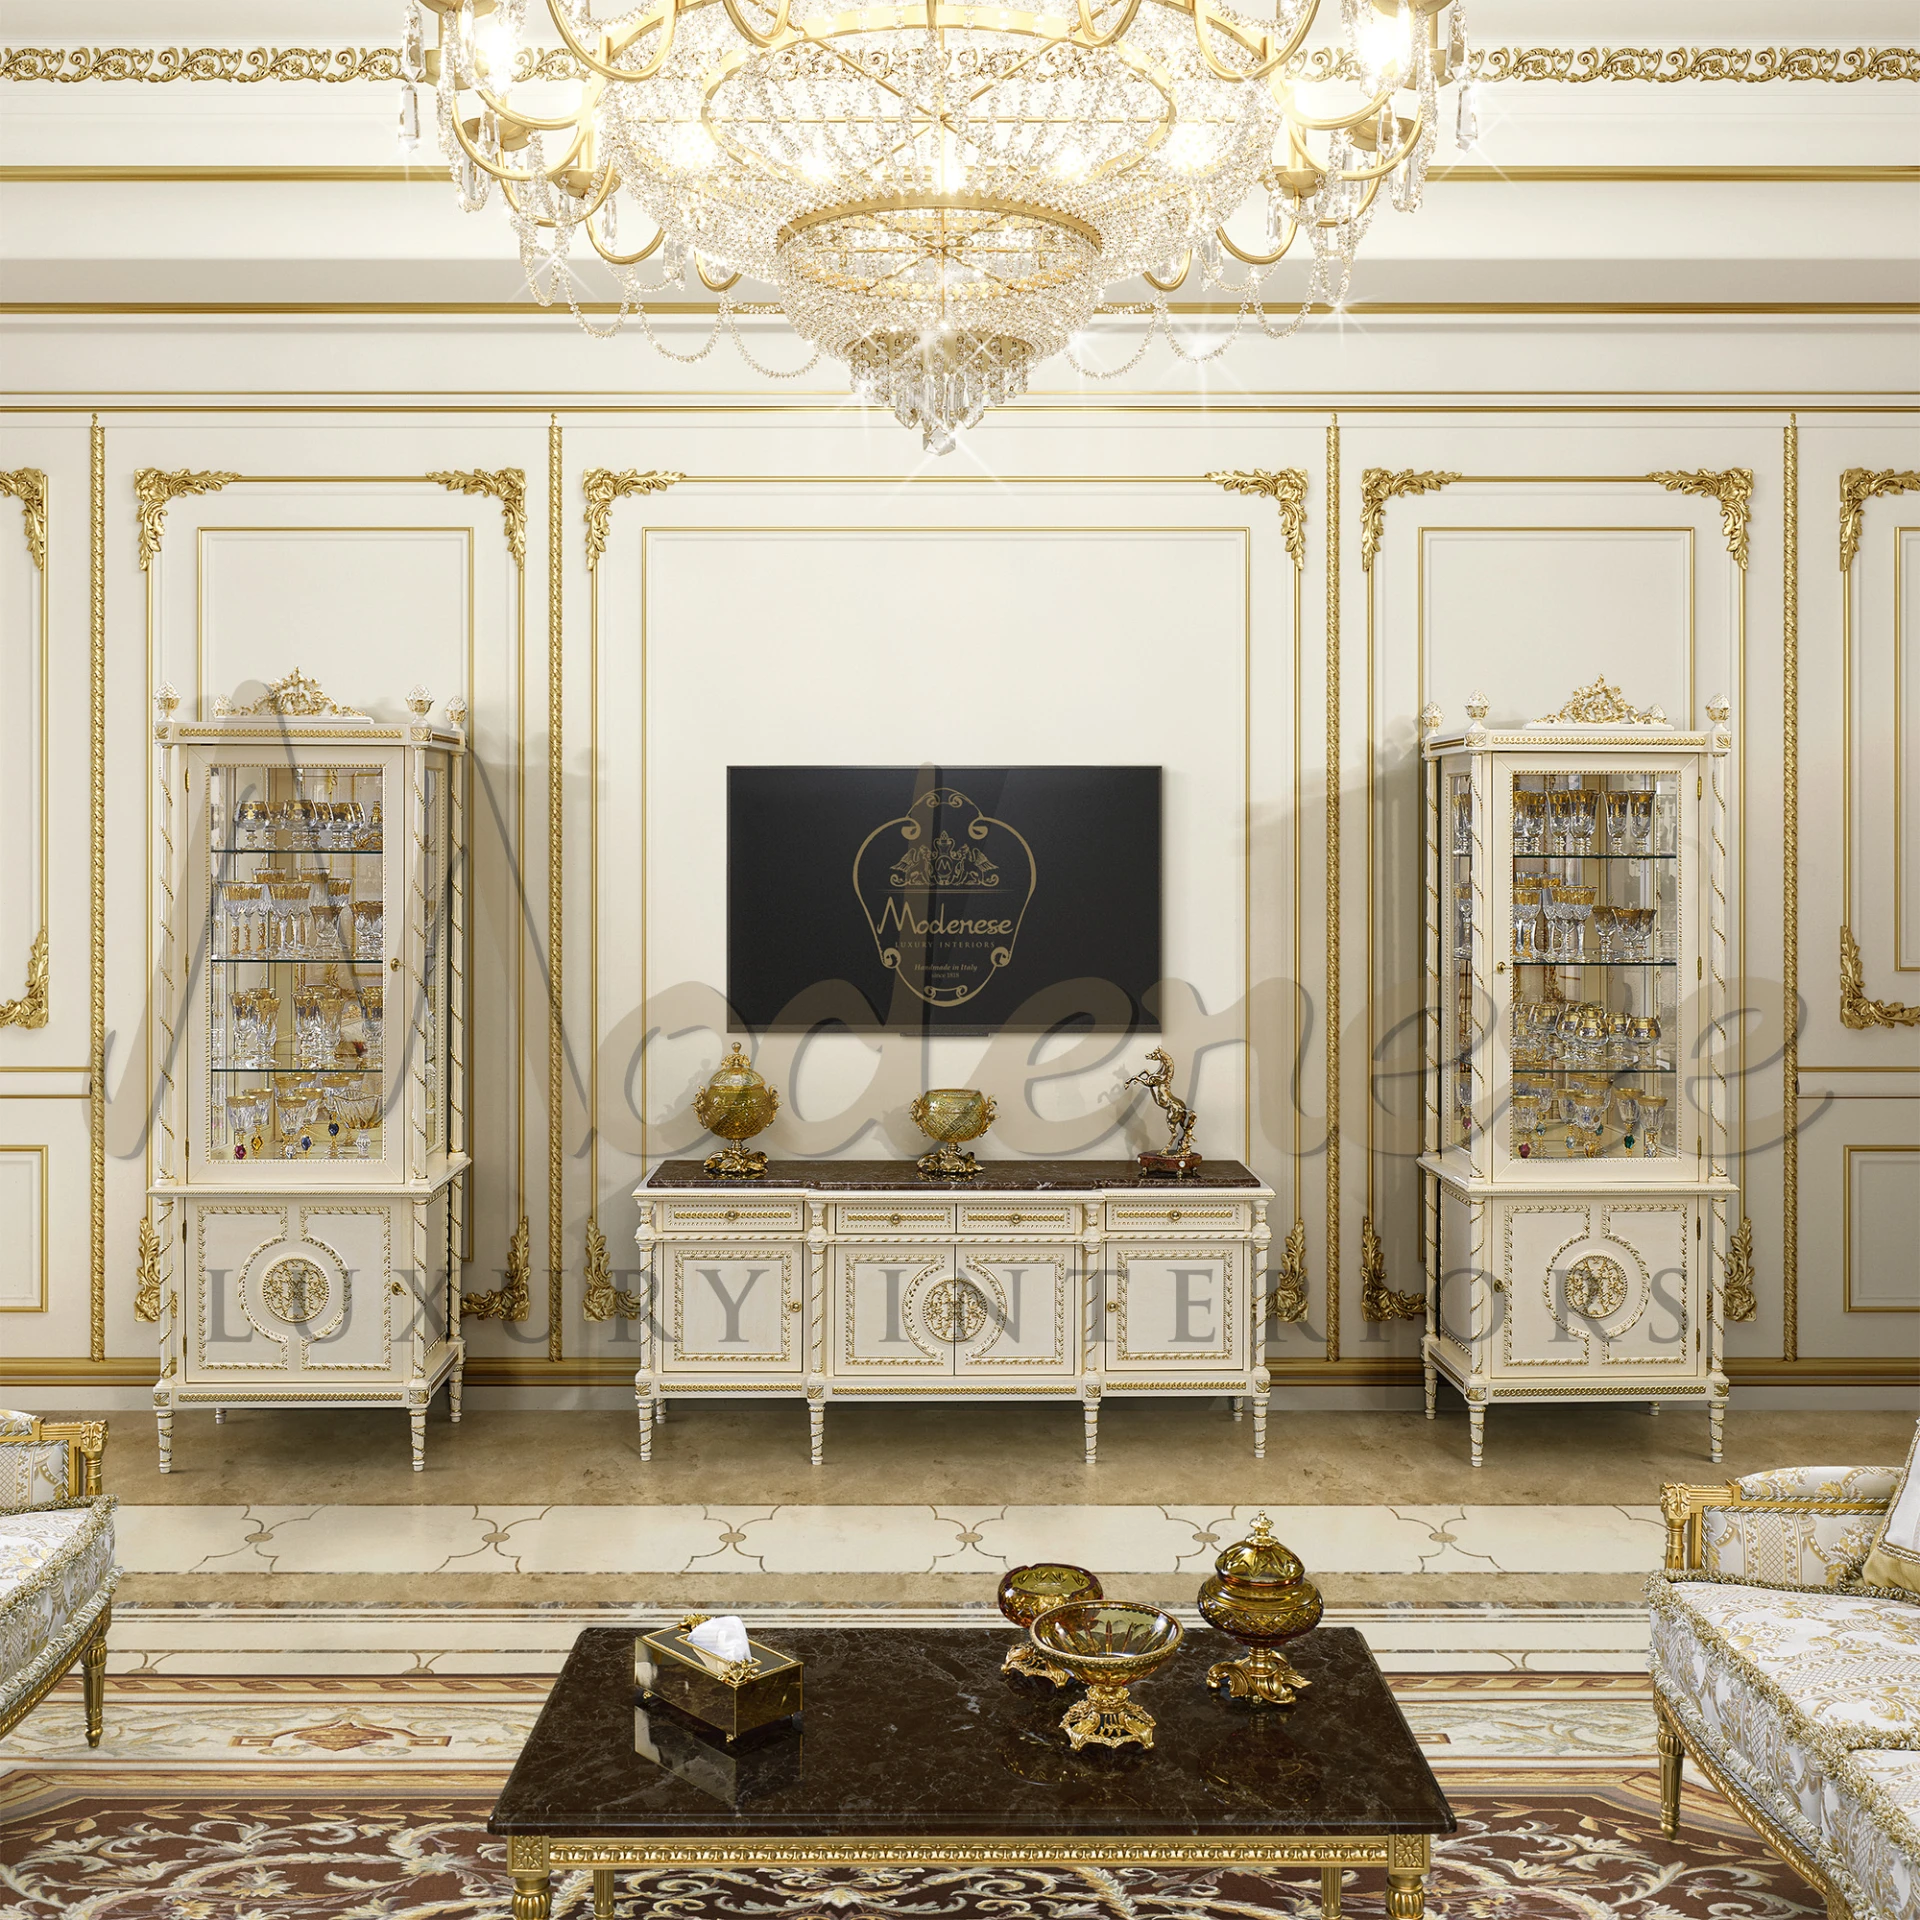 An interior design featuring classic white and golden furniture and complex ceiling art.